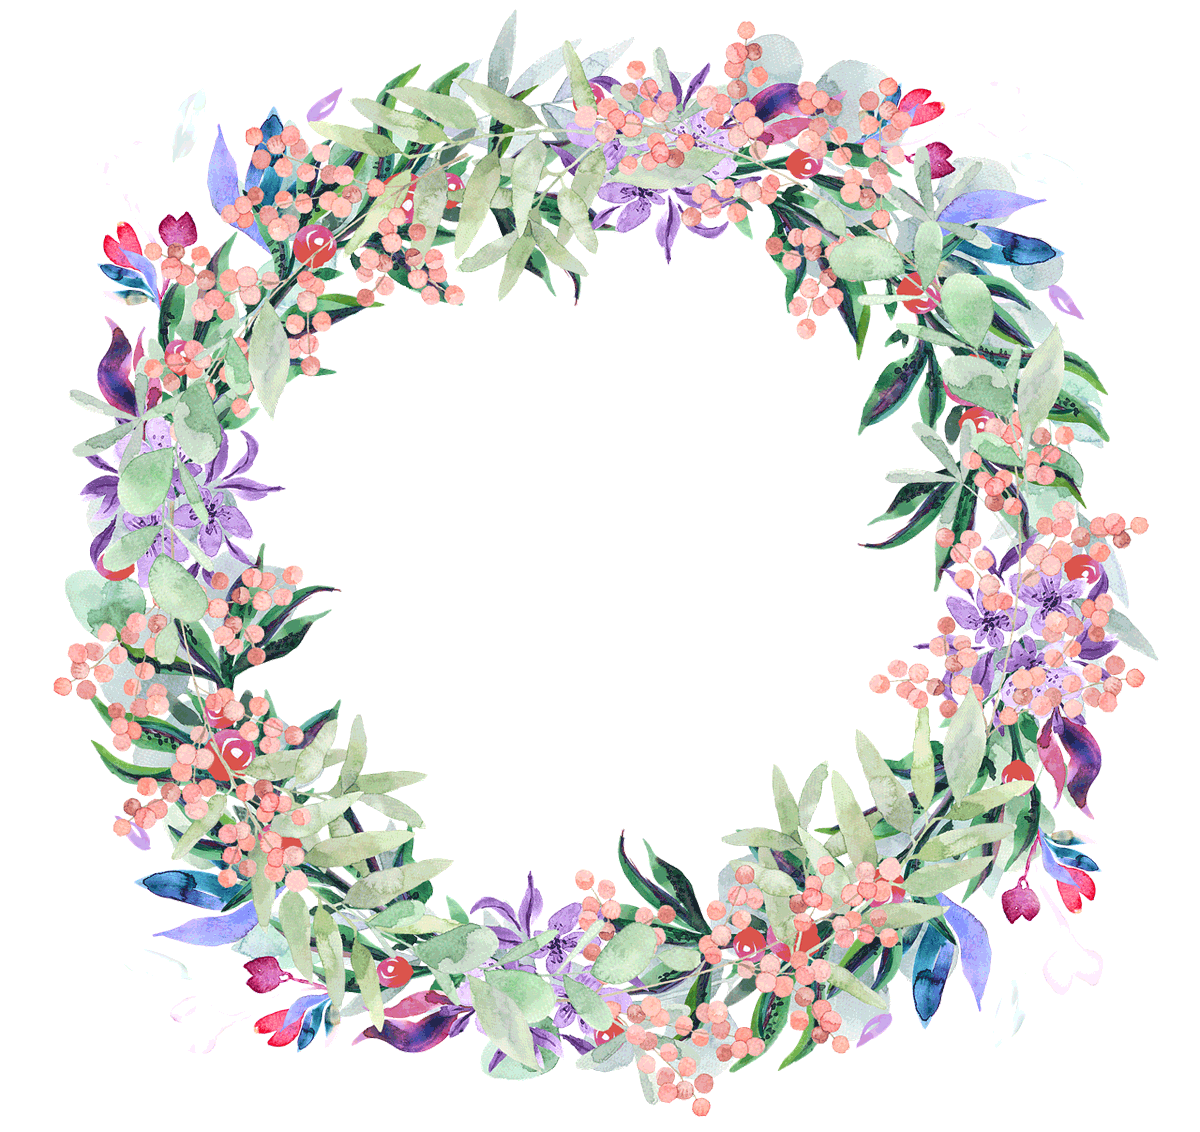 Freshen up your front door with a wreath this summer